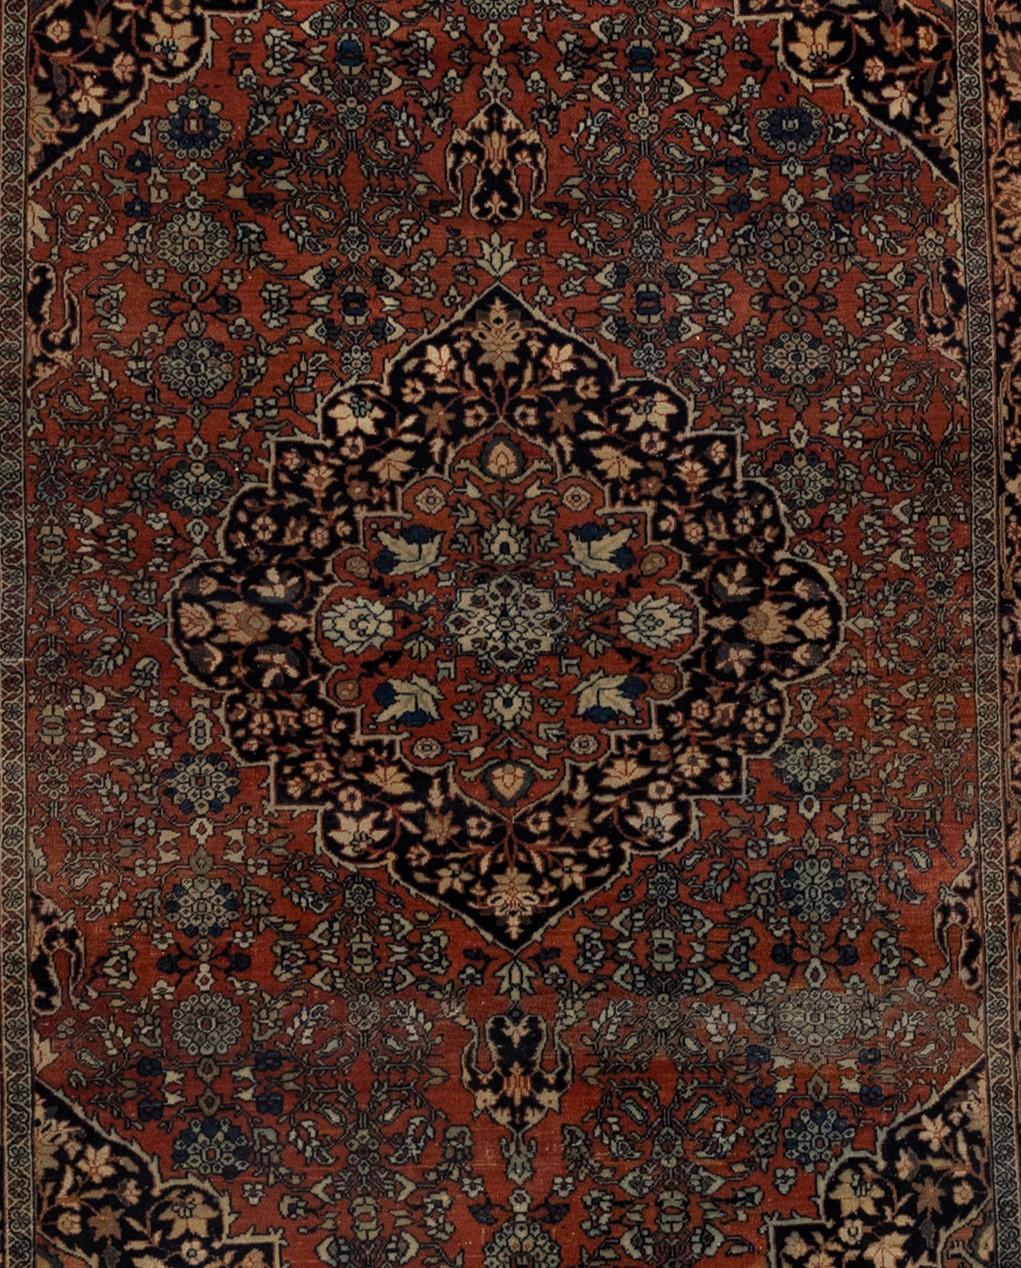 The Tribal Red Blue Floral Rug is a stunning Oriental area rug that boasts a perfectly synchronized floral backdrop and an extraordinary floral centerpiece at its core. Its rich colors and vintage appearance make it an essential piece of home décor